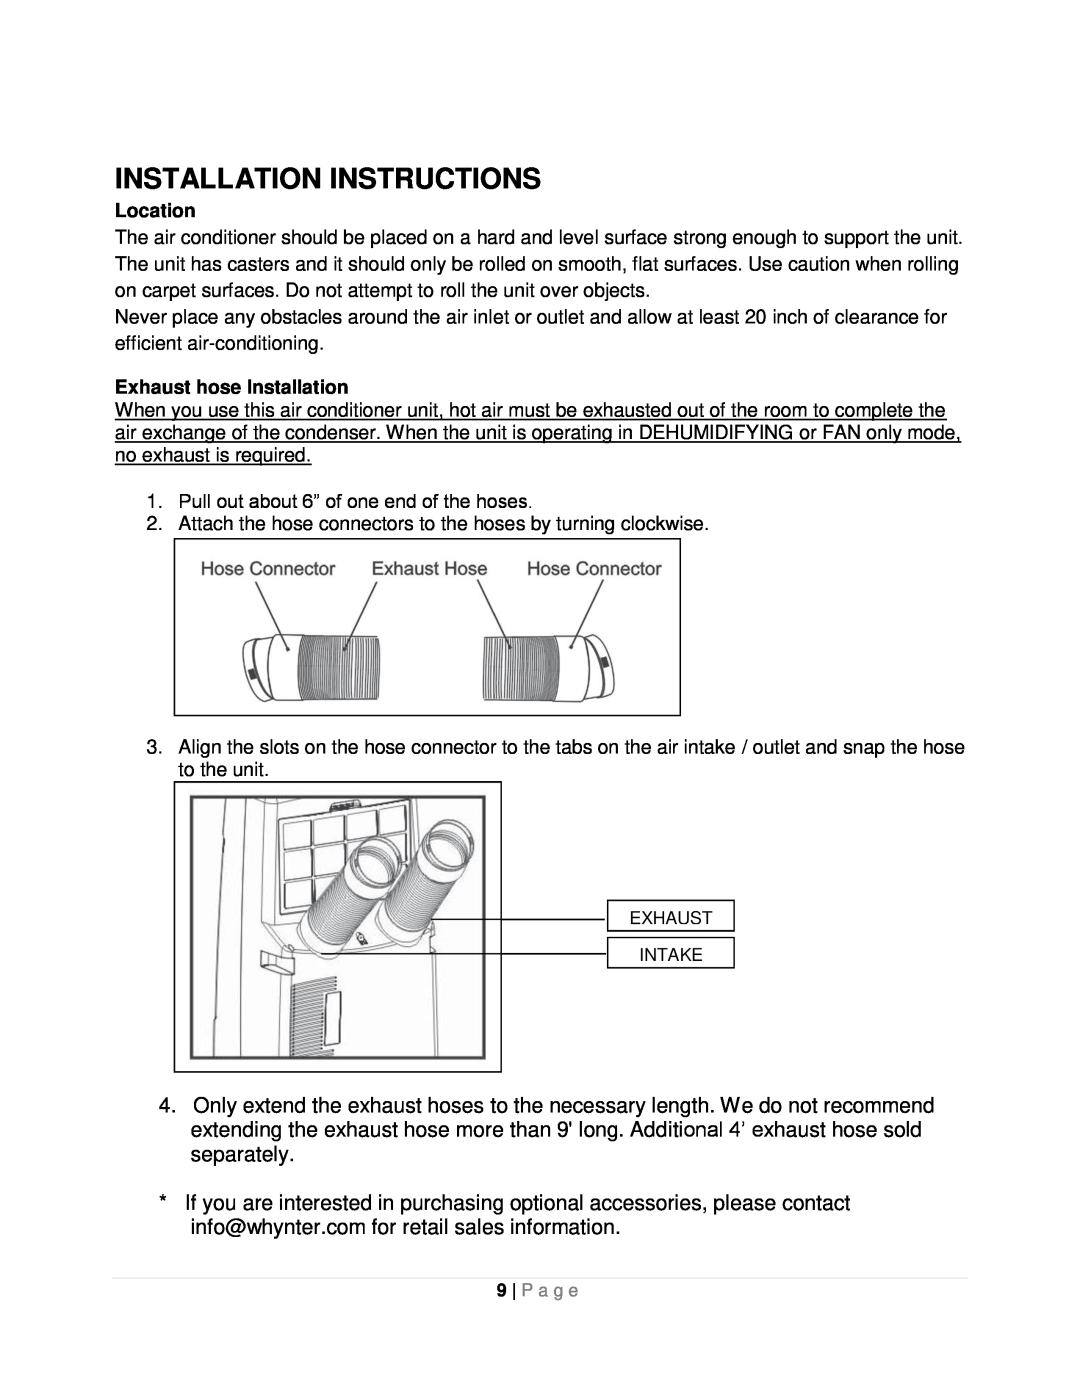 Whynter ARC-12SDH instruction manual Installation Instructions, Location, Exhaust hose Installation 